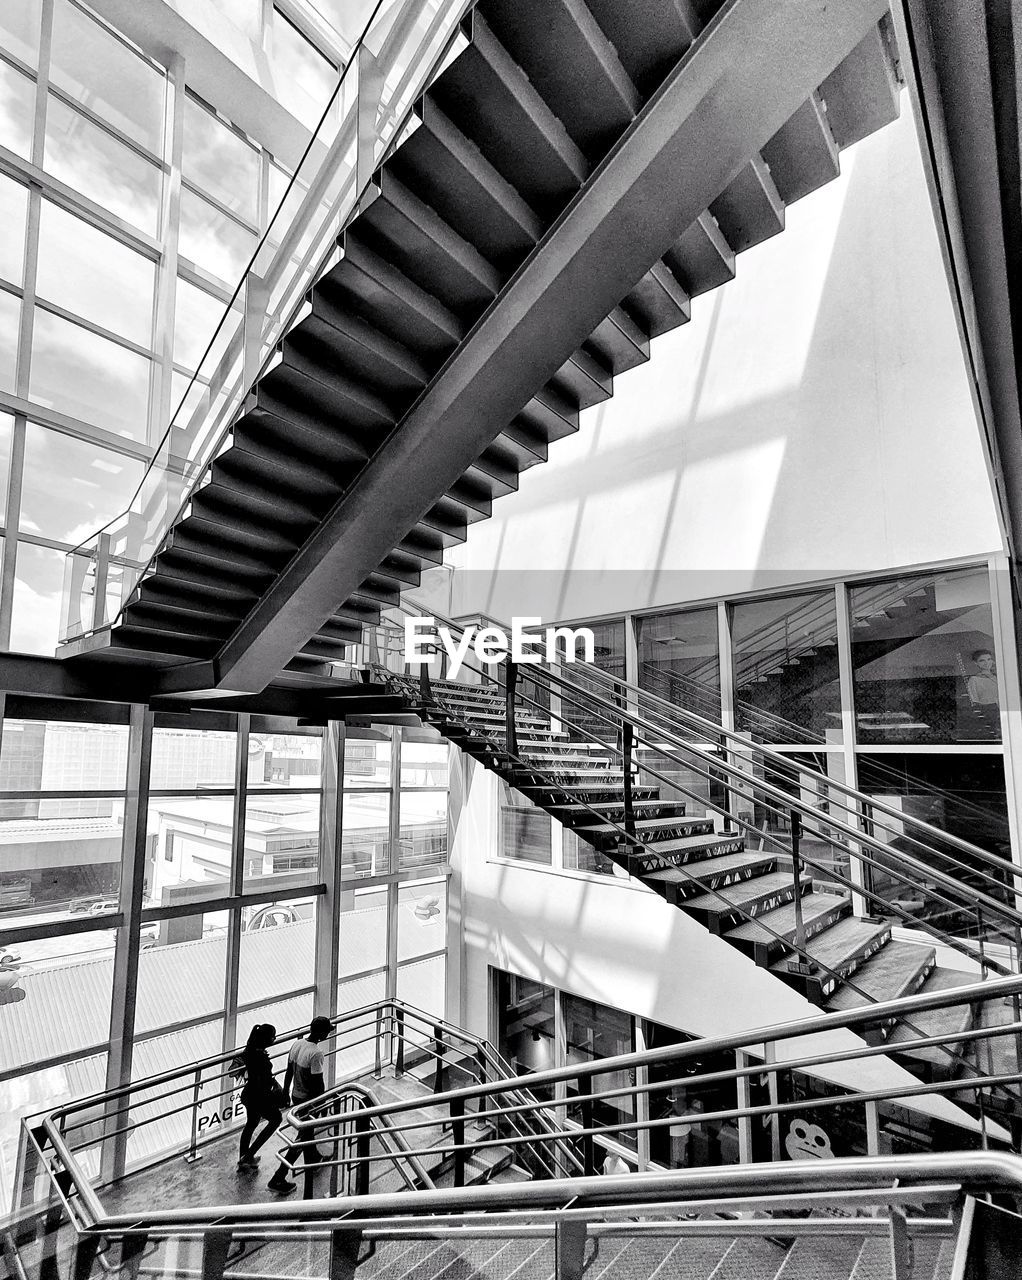 LOW ANGLE VIEW OF PEOPLE ON ESCALATOR IN MODERN BUILDING